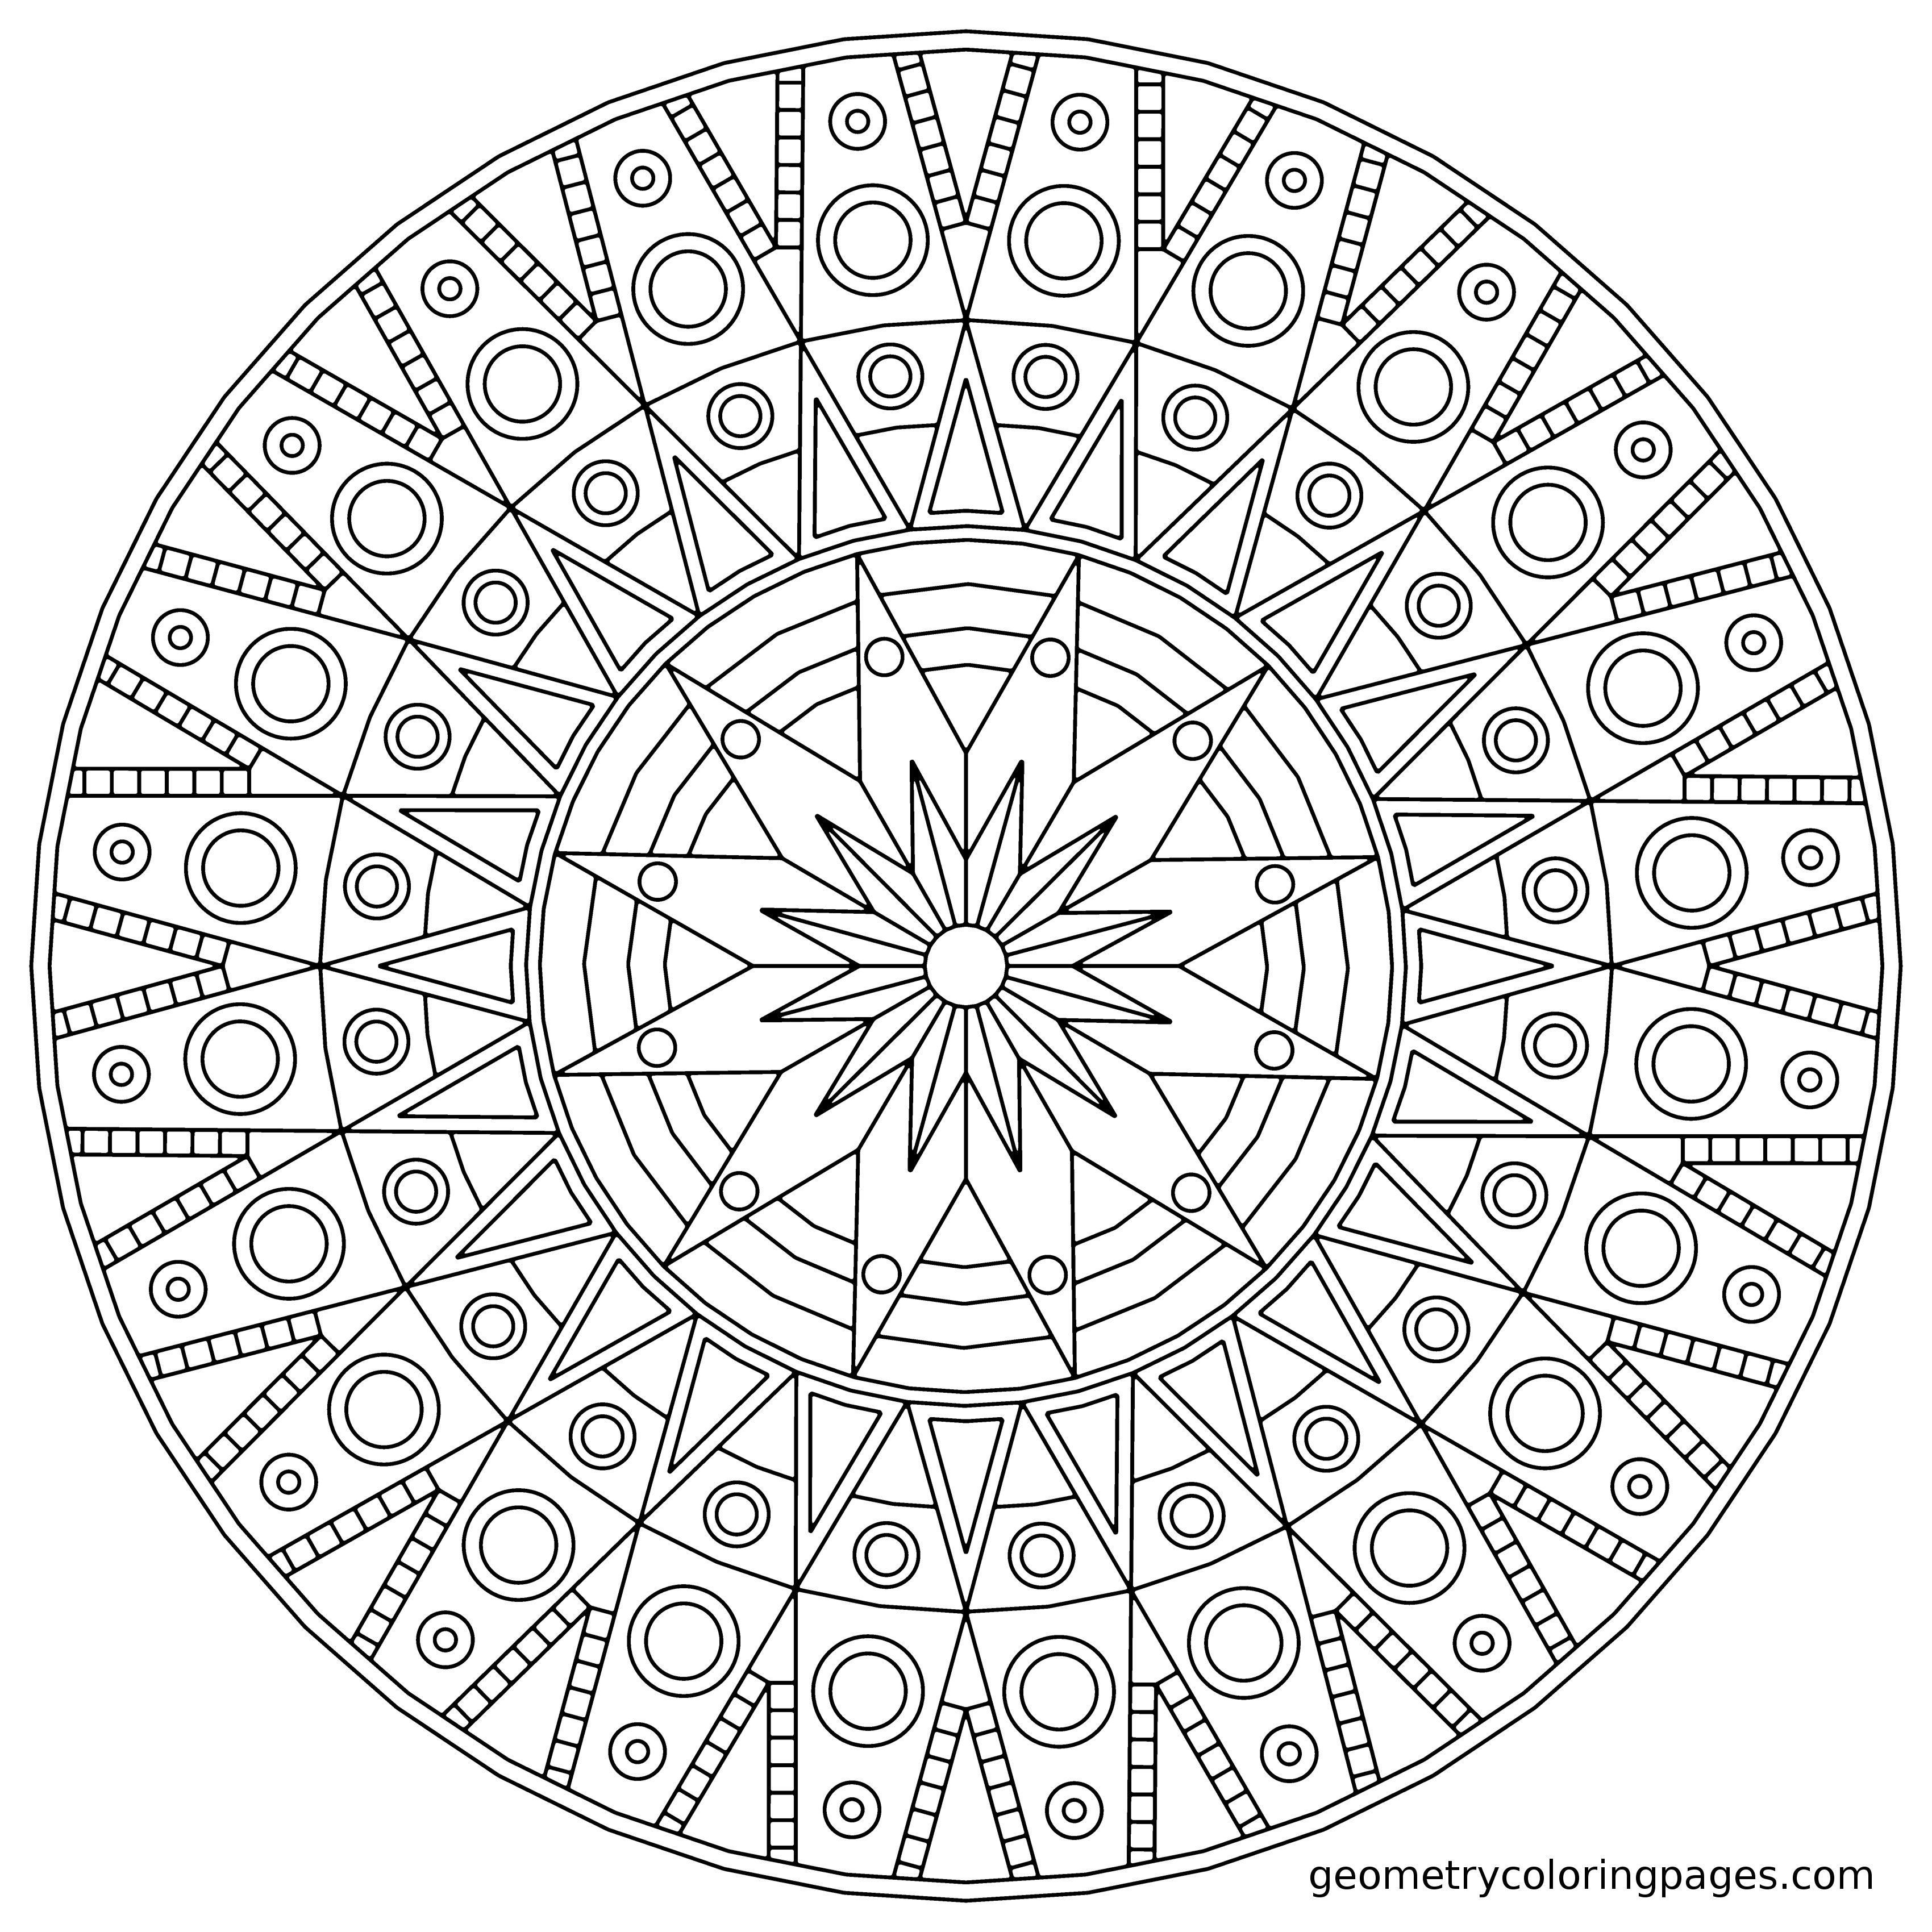 Coloring | Free Coloring Pages ...